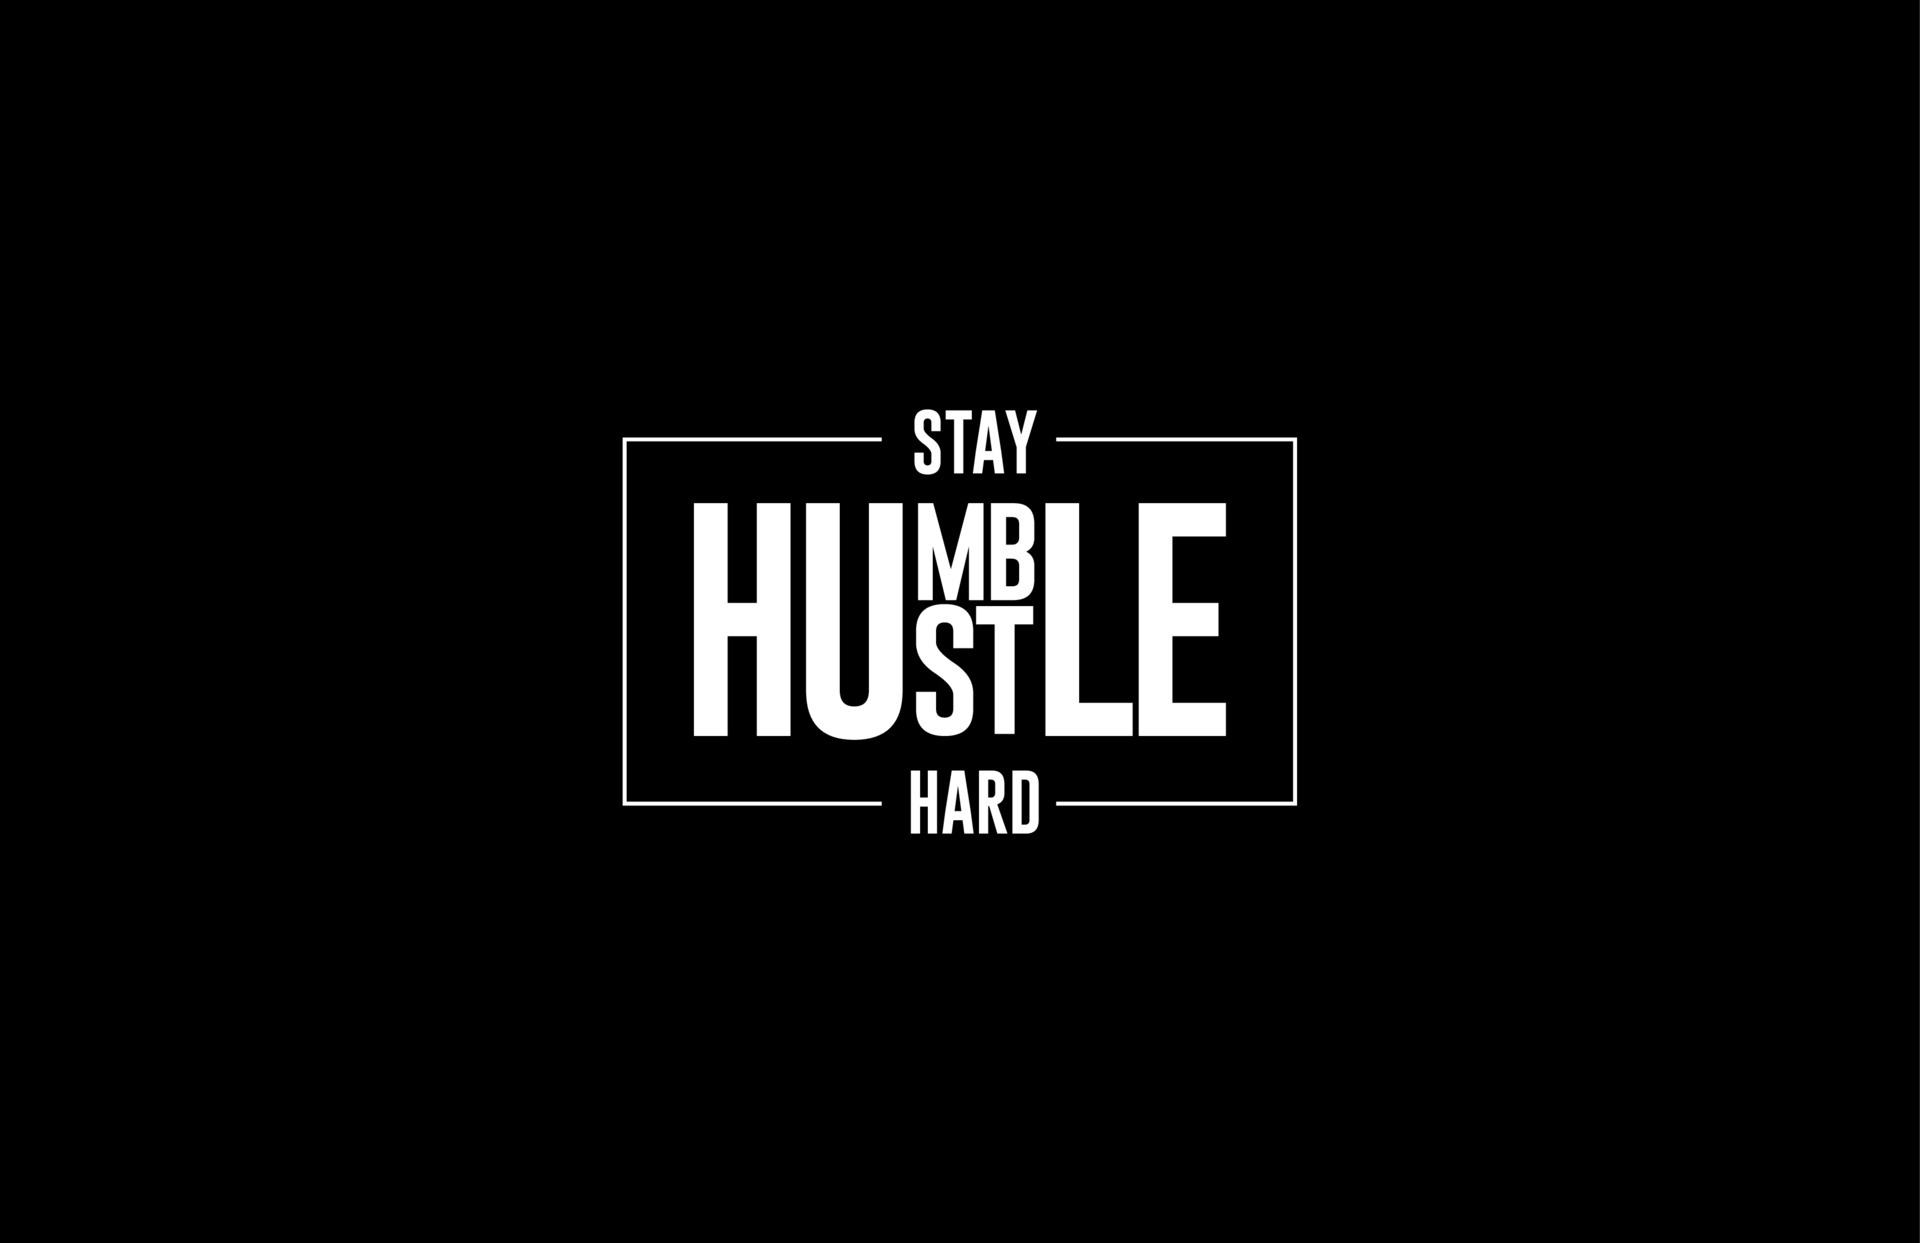 Free Stay Humble Wallpaper, Stay Humble Wallpaper Download - WallpaperUse -  1